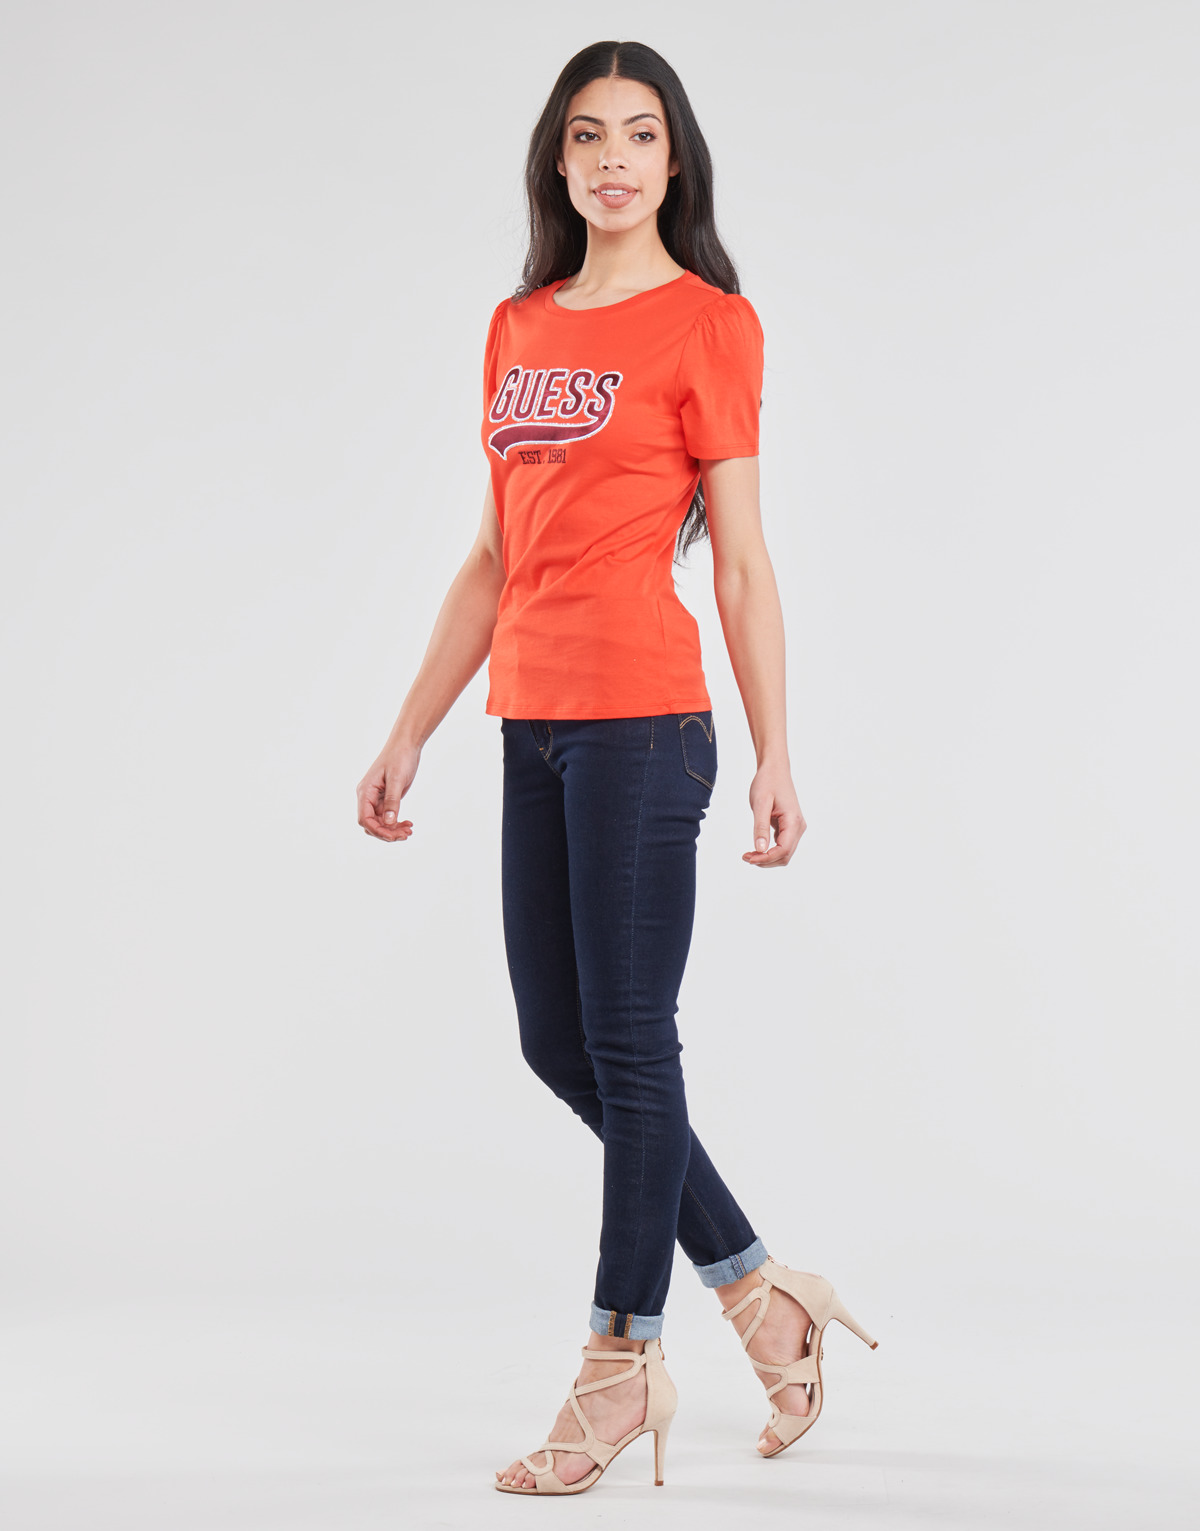 Guess Rouge SS CN MARISOL TEE snYzykbF